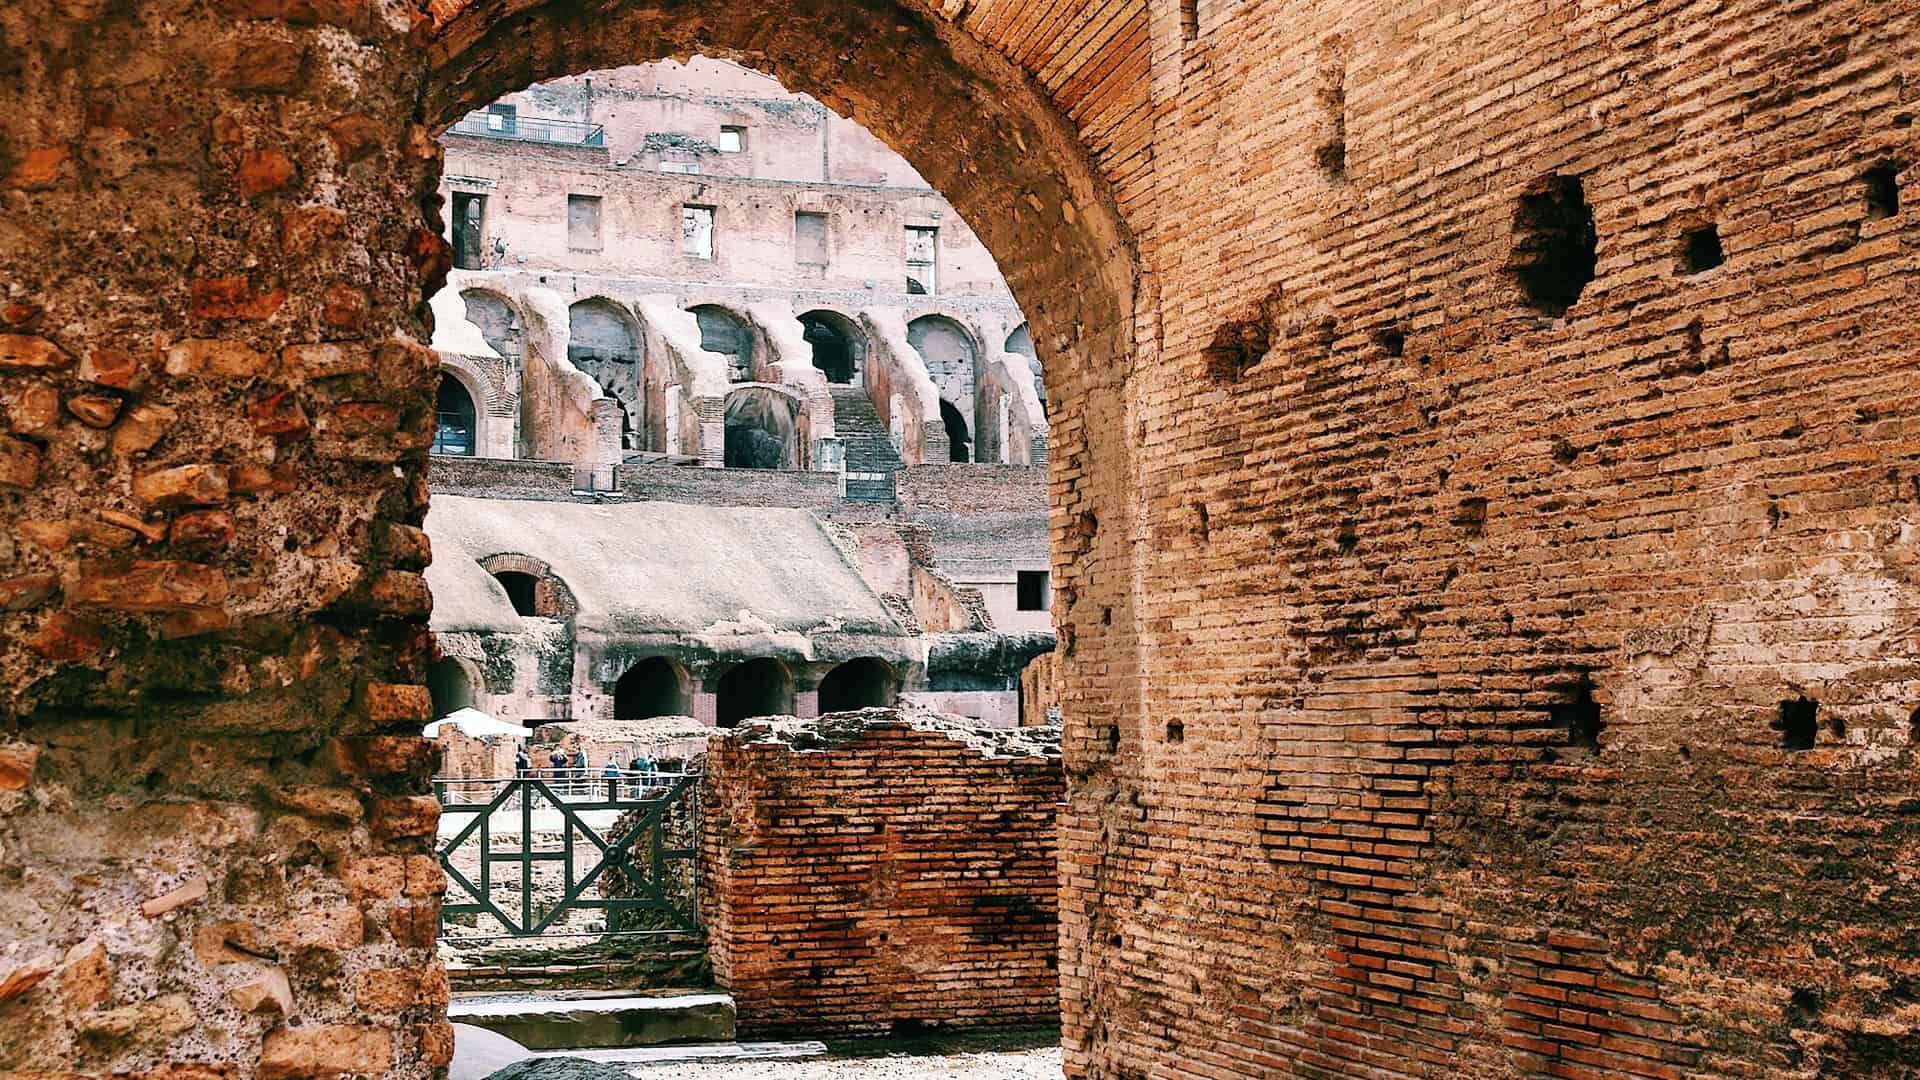 A photo of the Colosseum in Rome